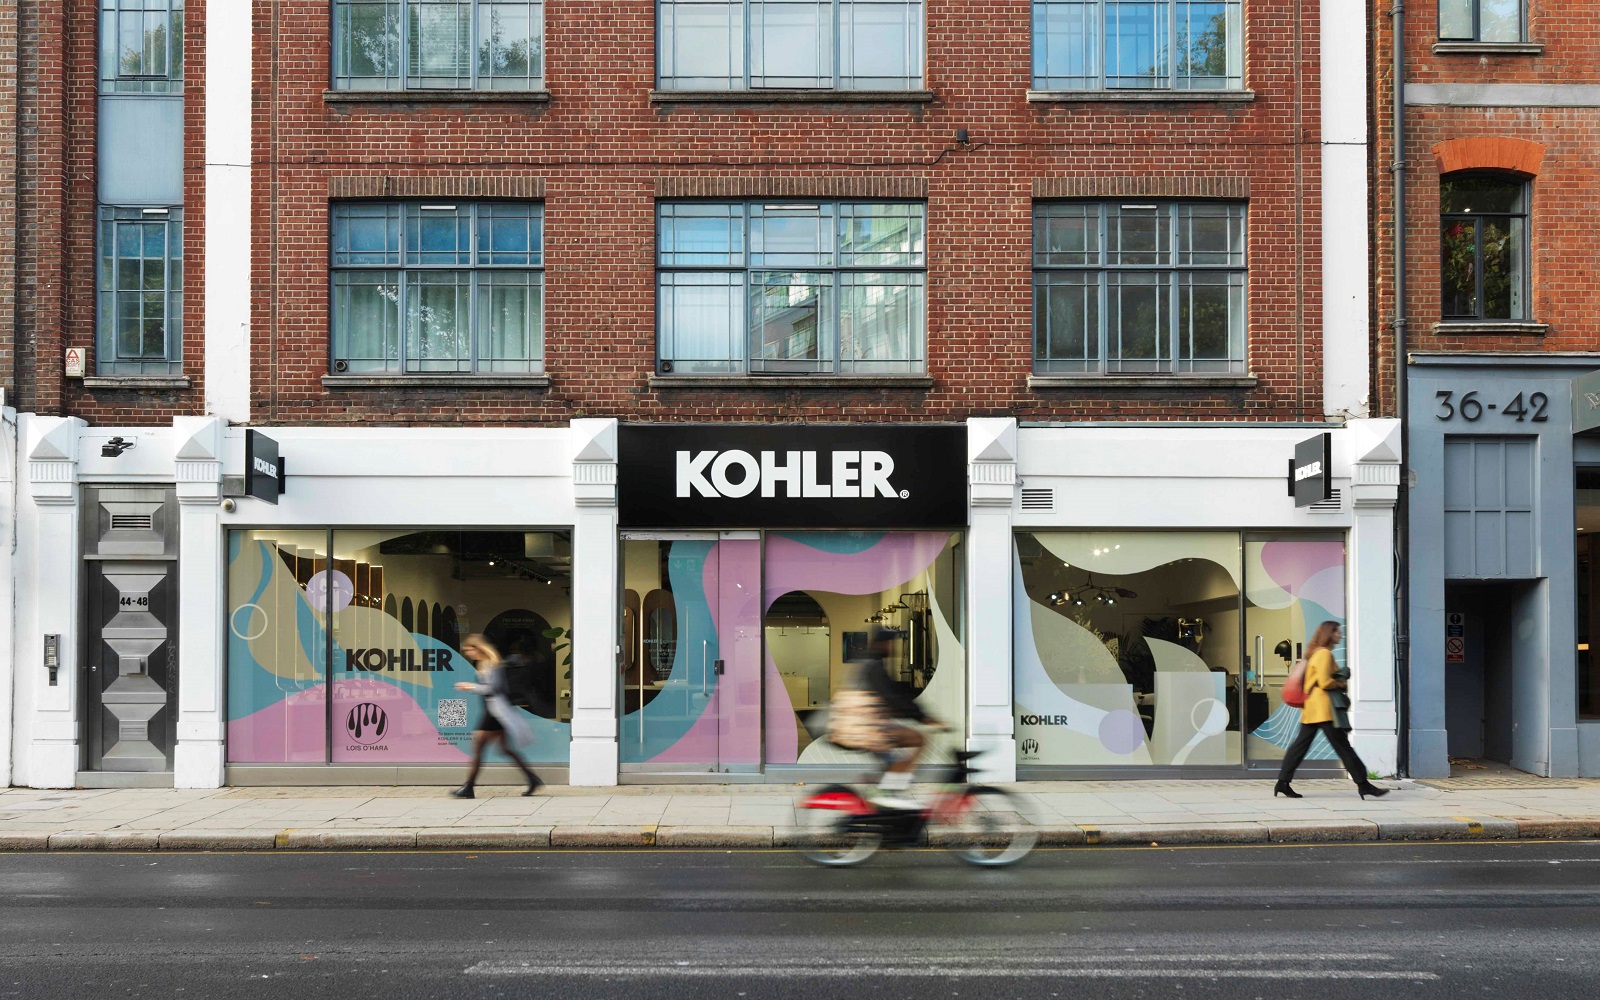 KOHLER London showroom window painted colourful abstract design by Lois O'Hara